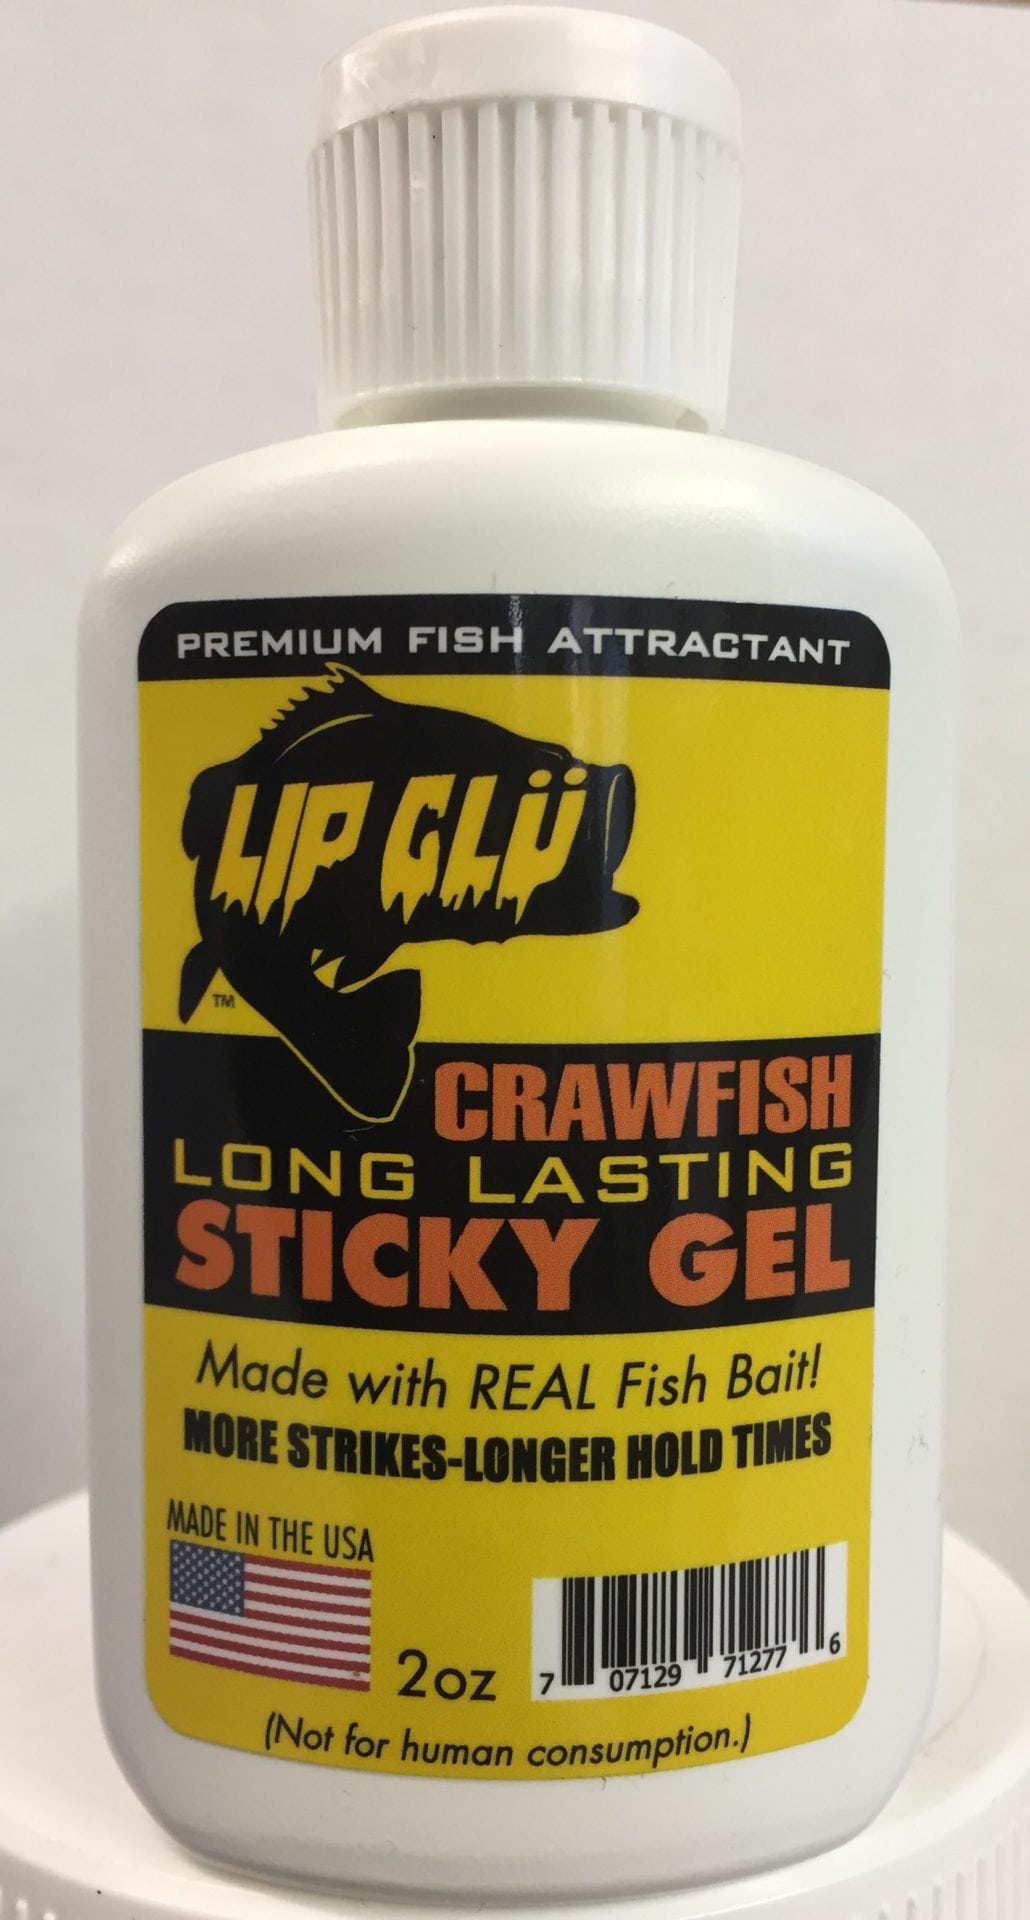 A bottle of fish attractant